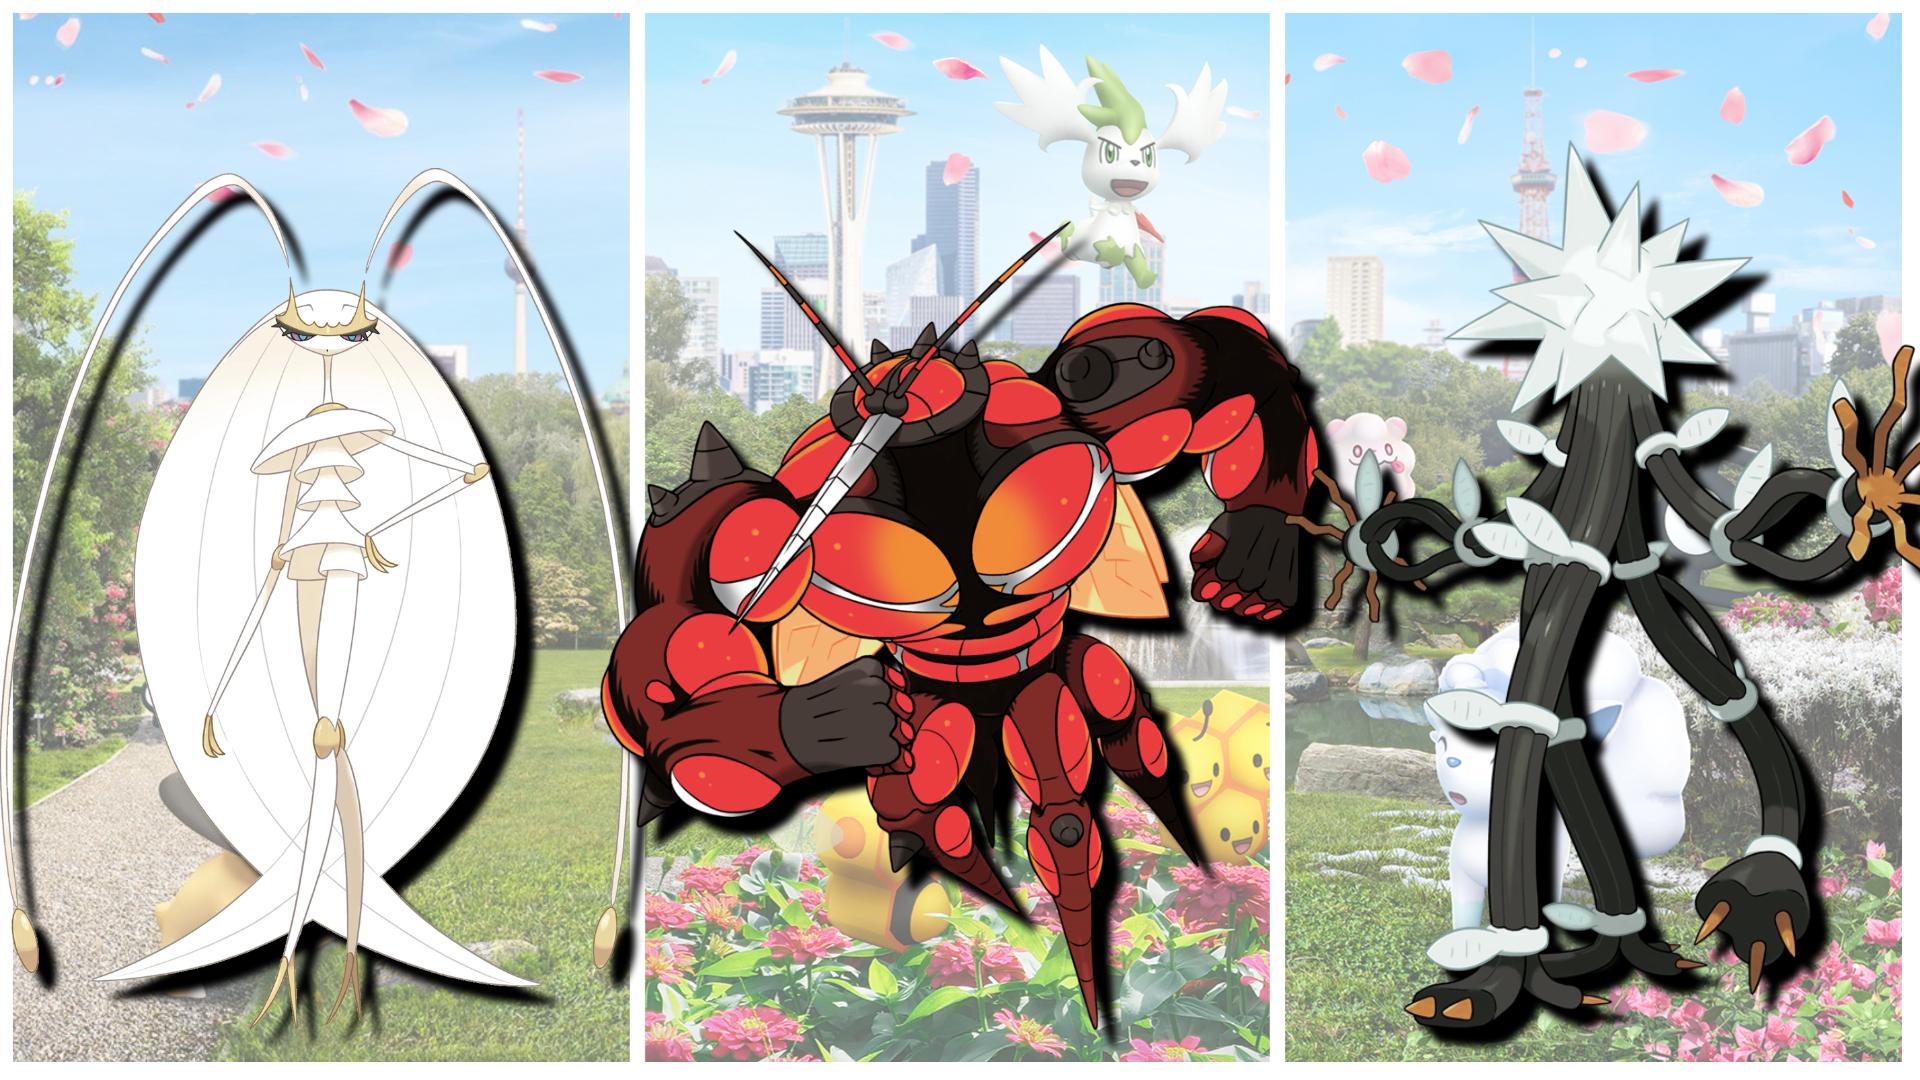 Pokemon GO Fest 2022 In-Person Events: Ultra Beasts, Beast Balls, and More